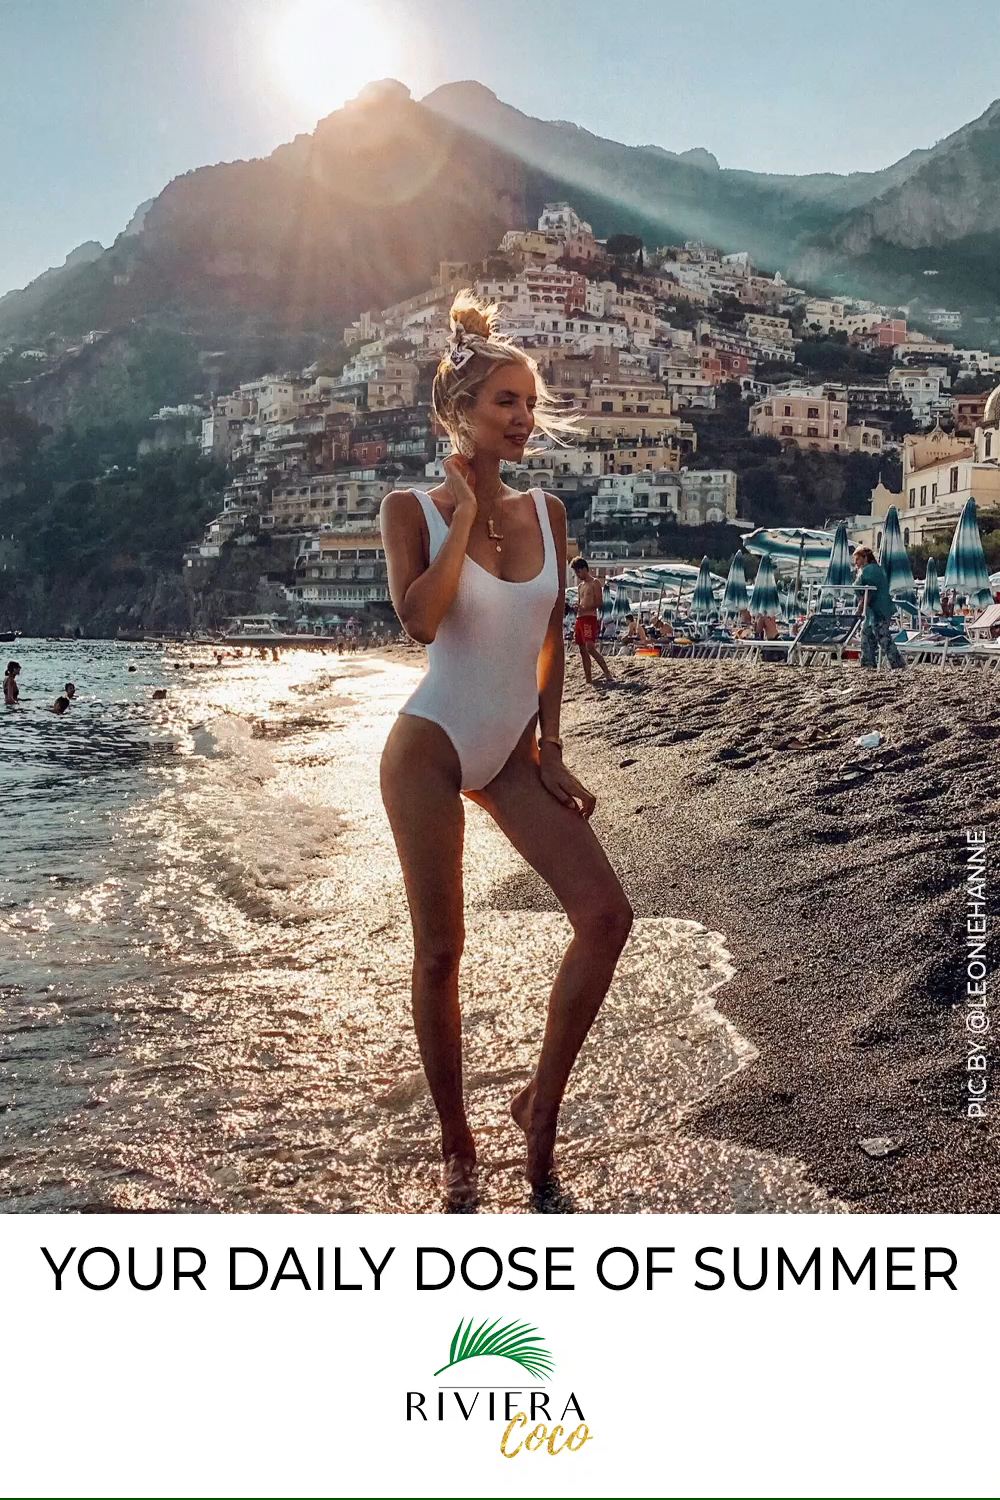 Travel Destinations | Summer Motivation | Your Daily Dose Of Summer | Riviera Coco -   17 holiday Fashion inspiration ideas